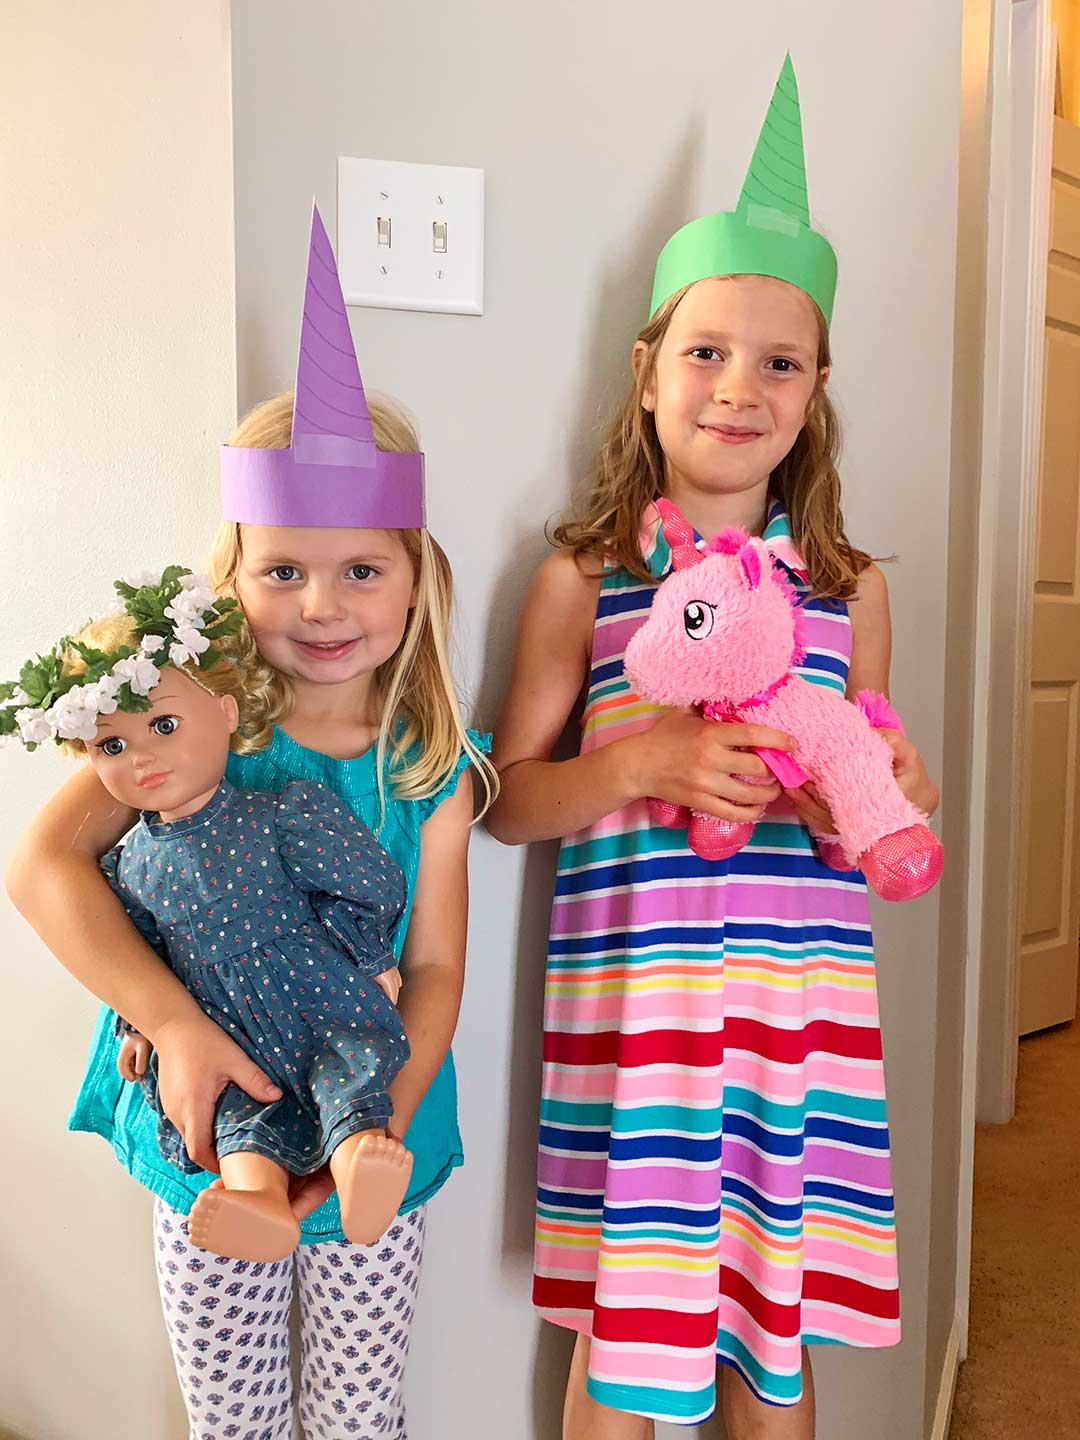 Two girls wearing unicorn crowns smile at camera holding a doll and a unicorn stuffed animal.